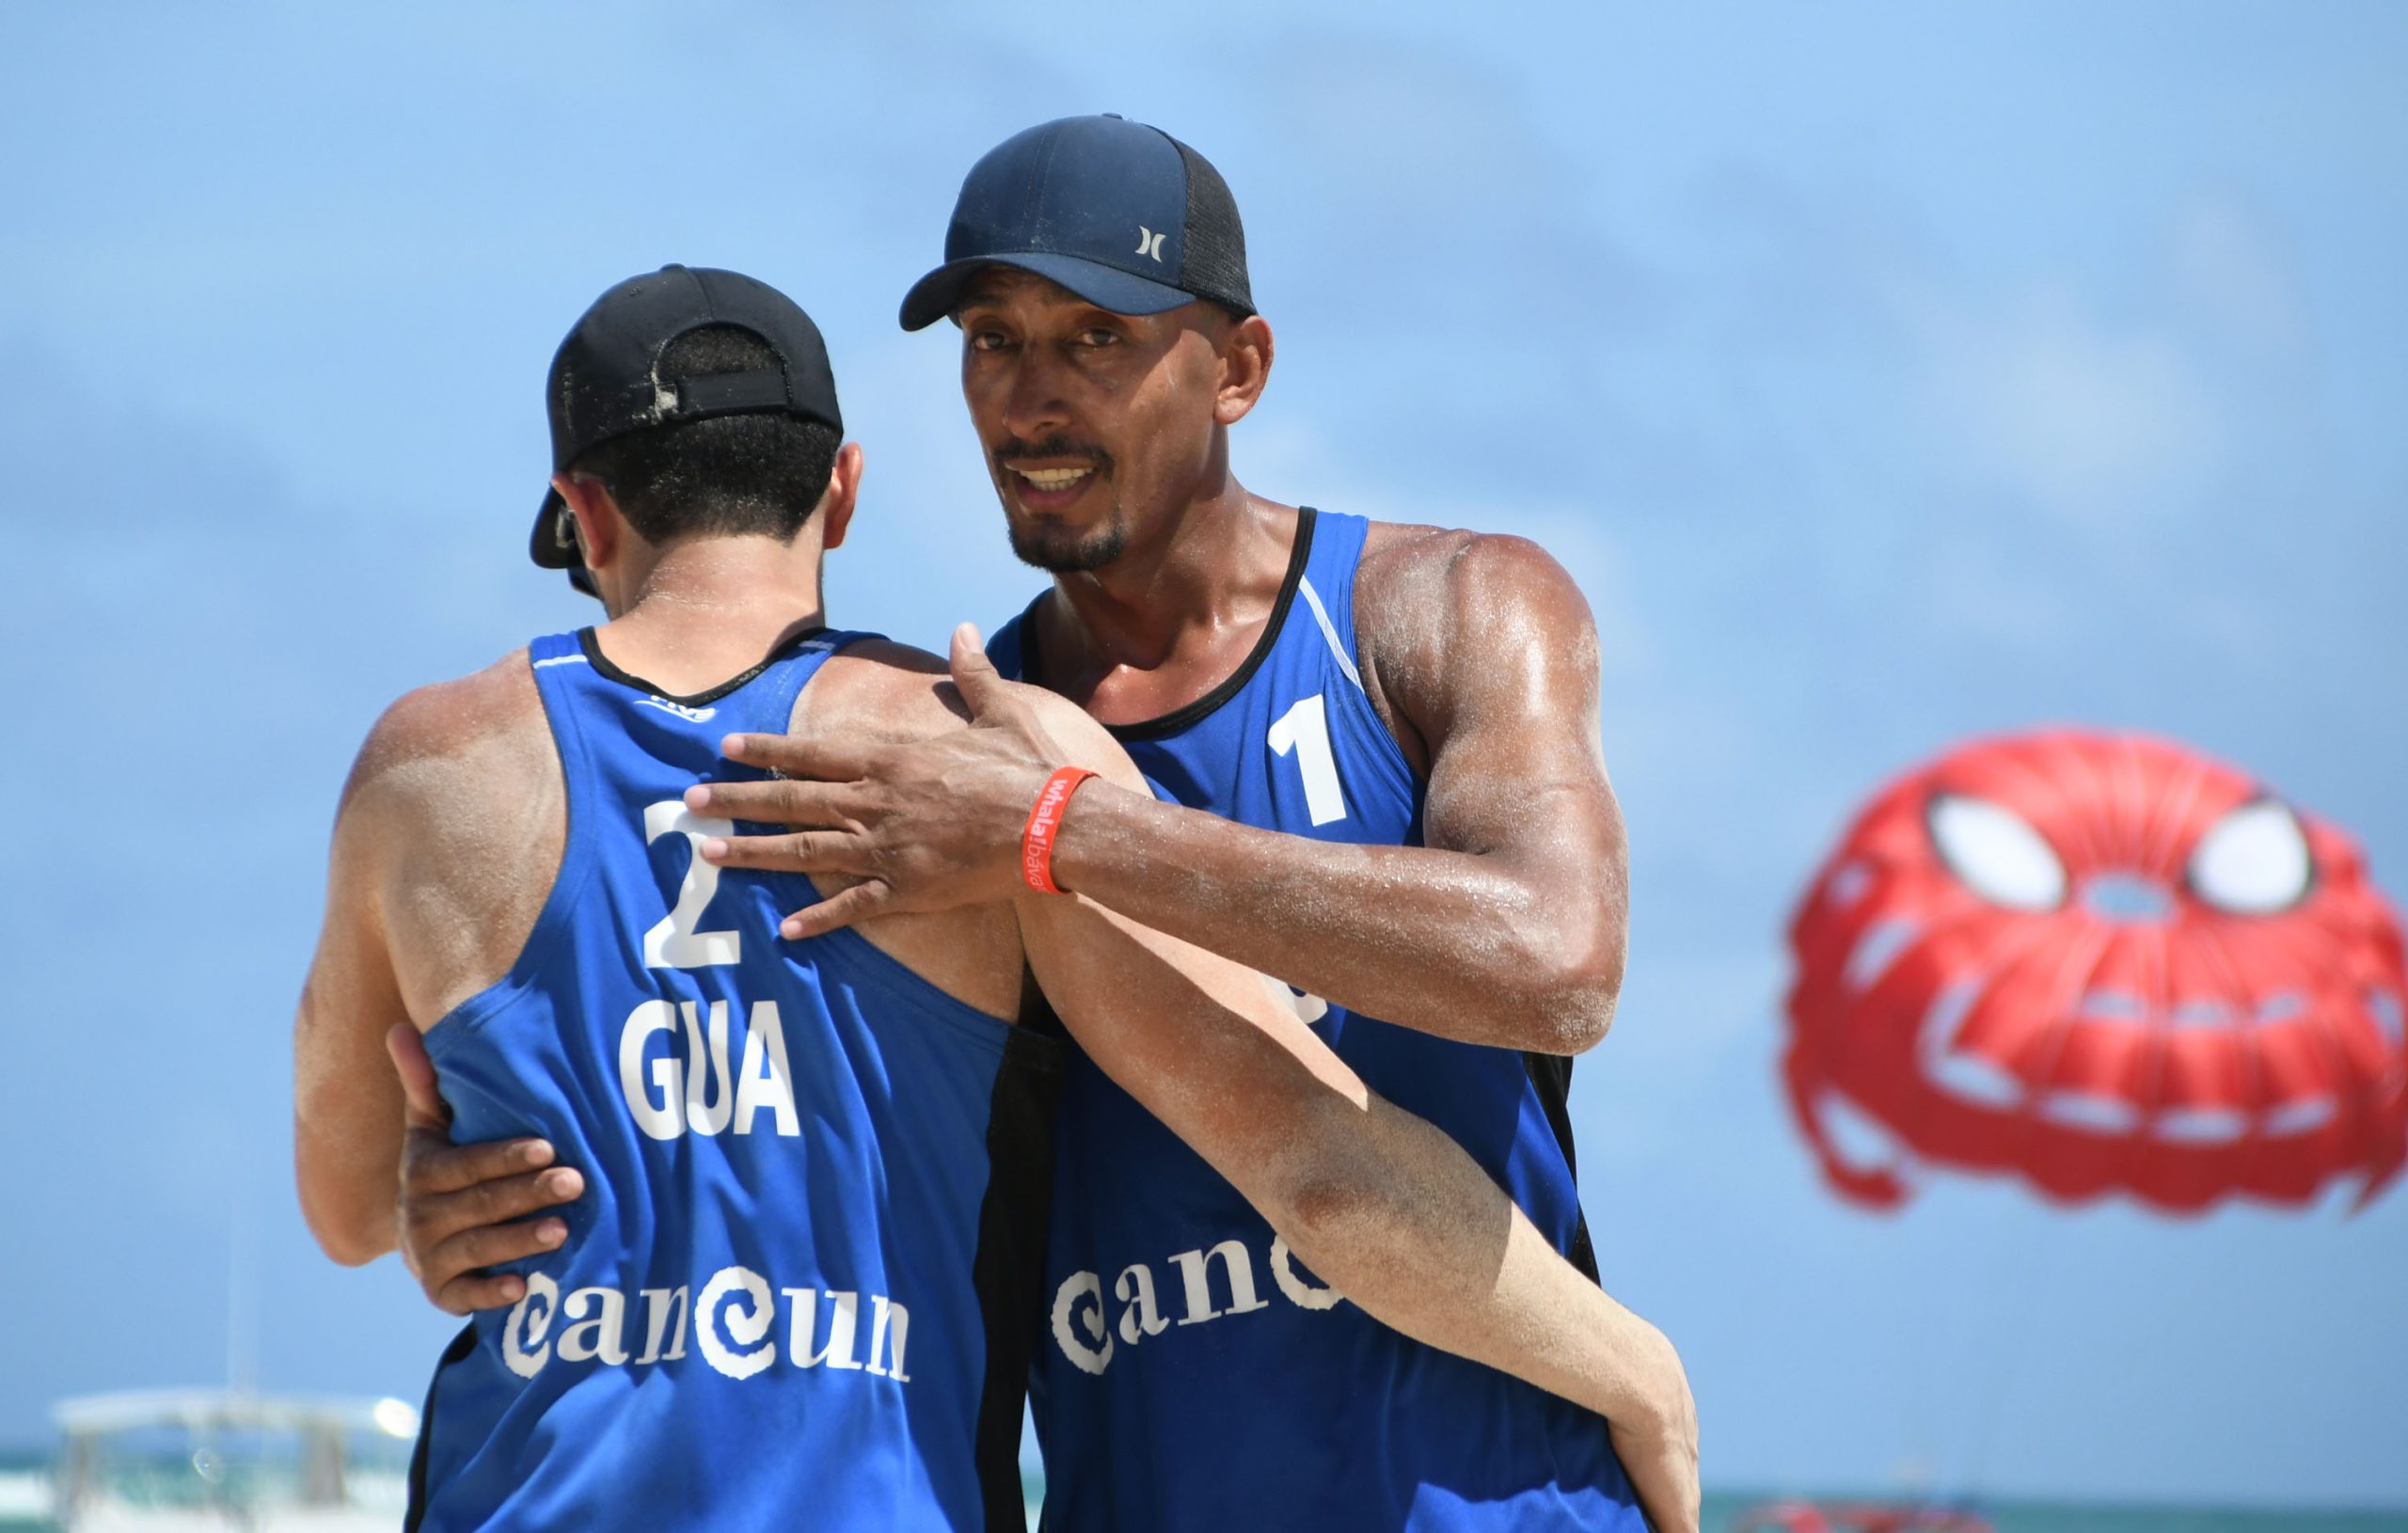 Four undefeated male duos in Punta Cana